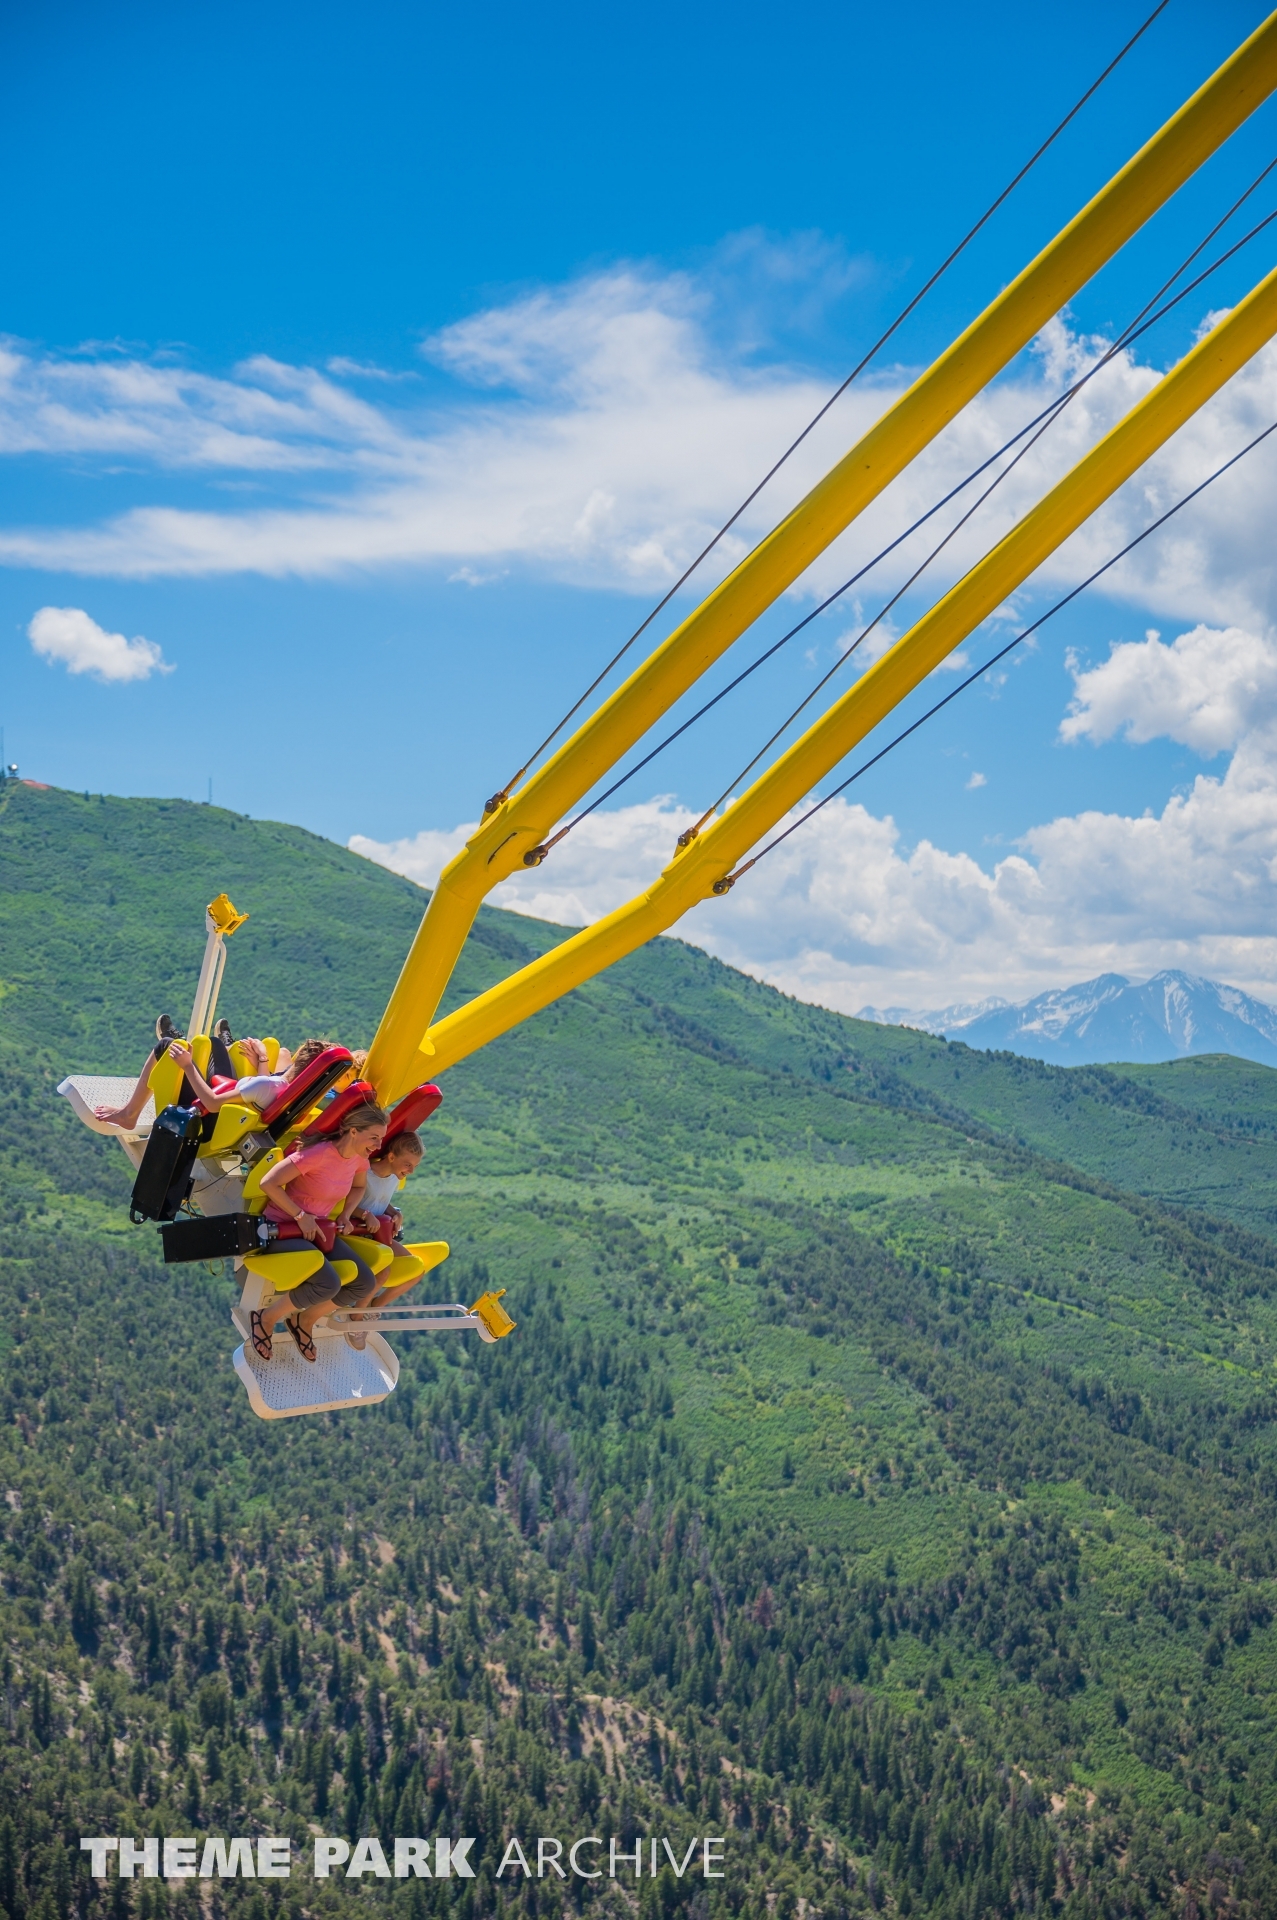 Giant Canyon Swing at Glenwood Caverns Adventure Park | Theme Park Archive